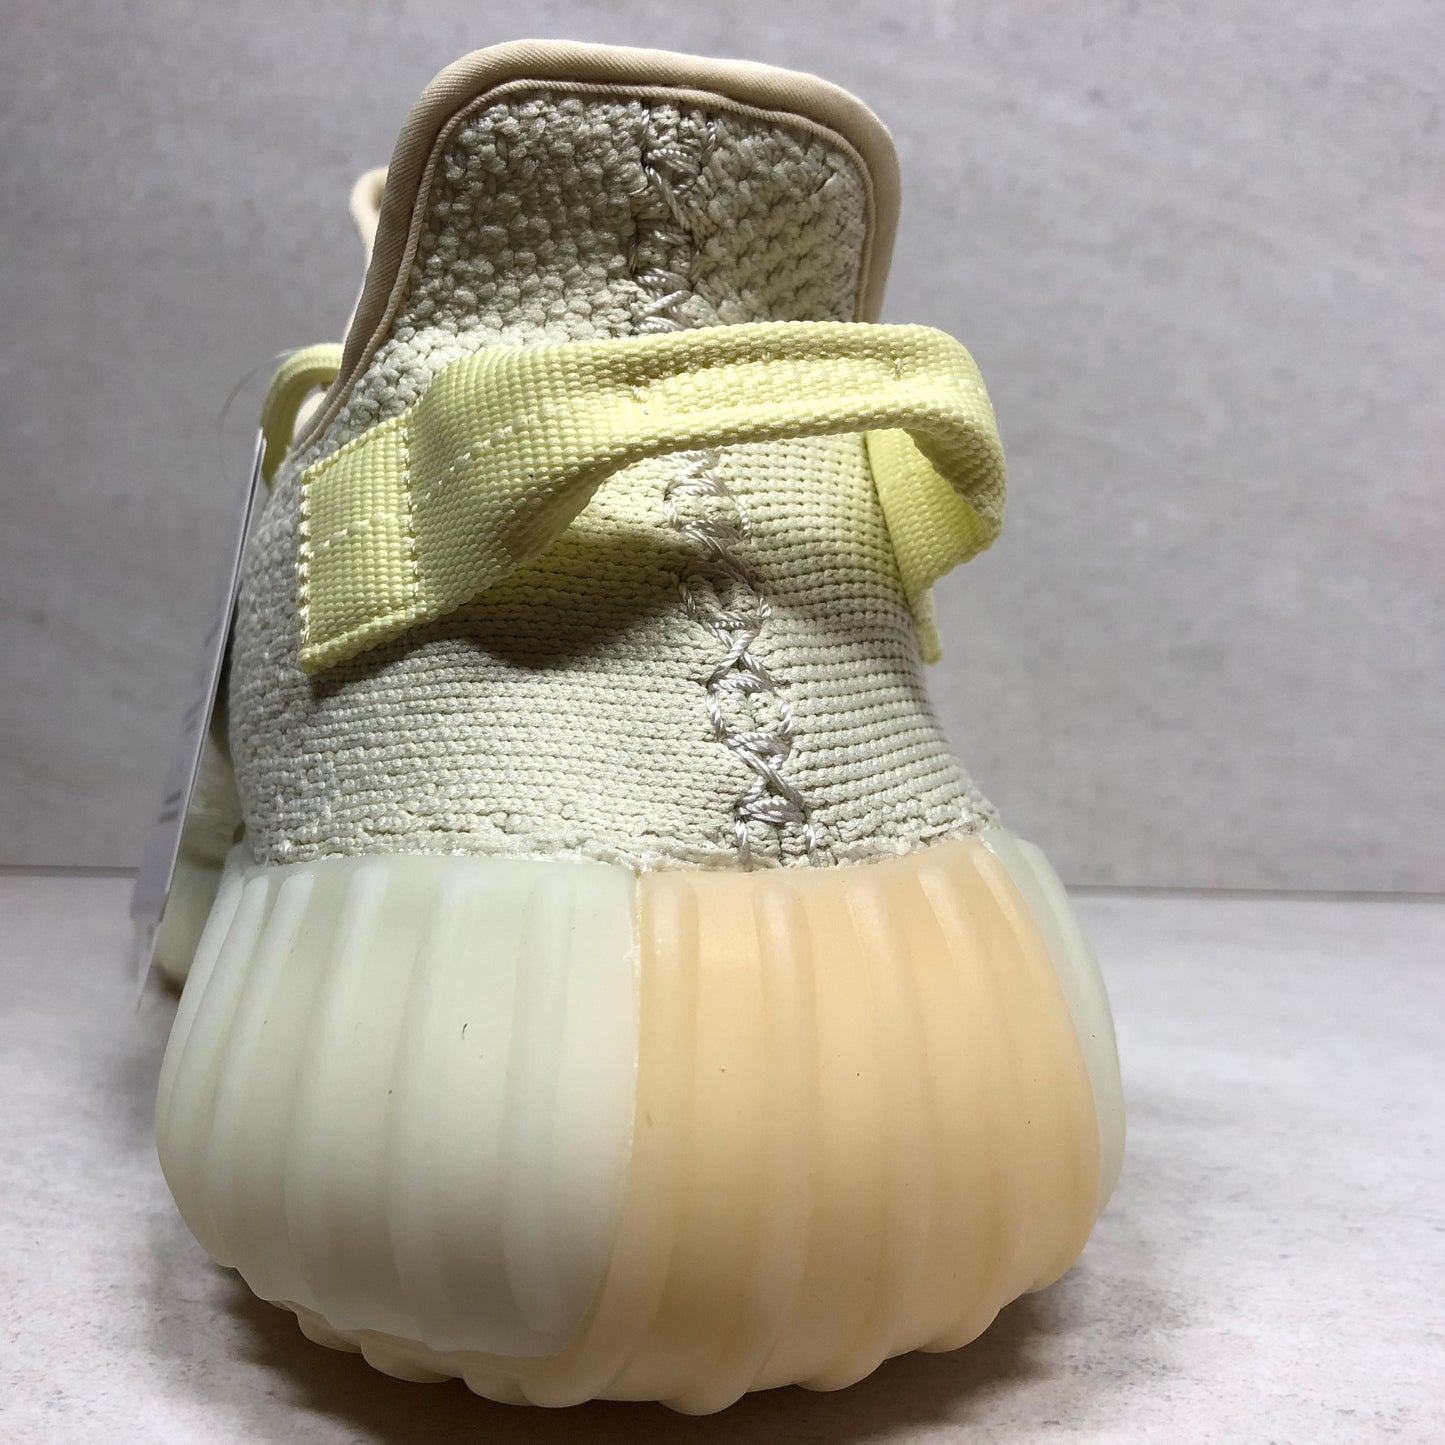 Adidas Yeezy Boost 350 V2 Butter F36980 Men's Size 10